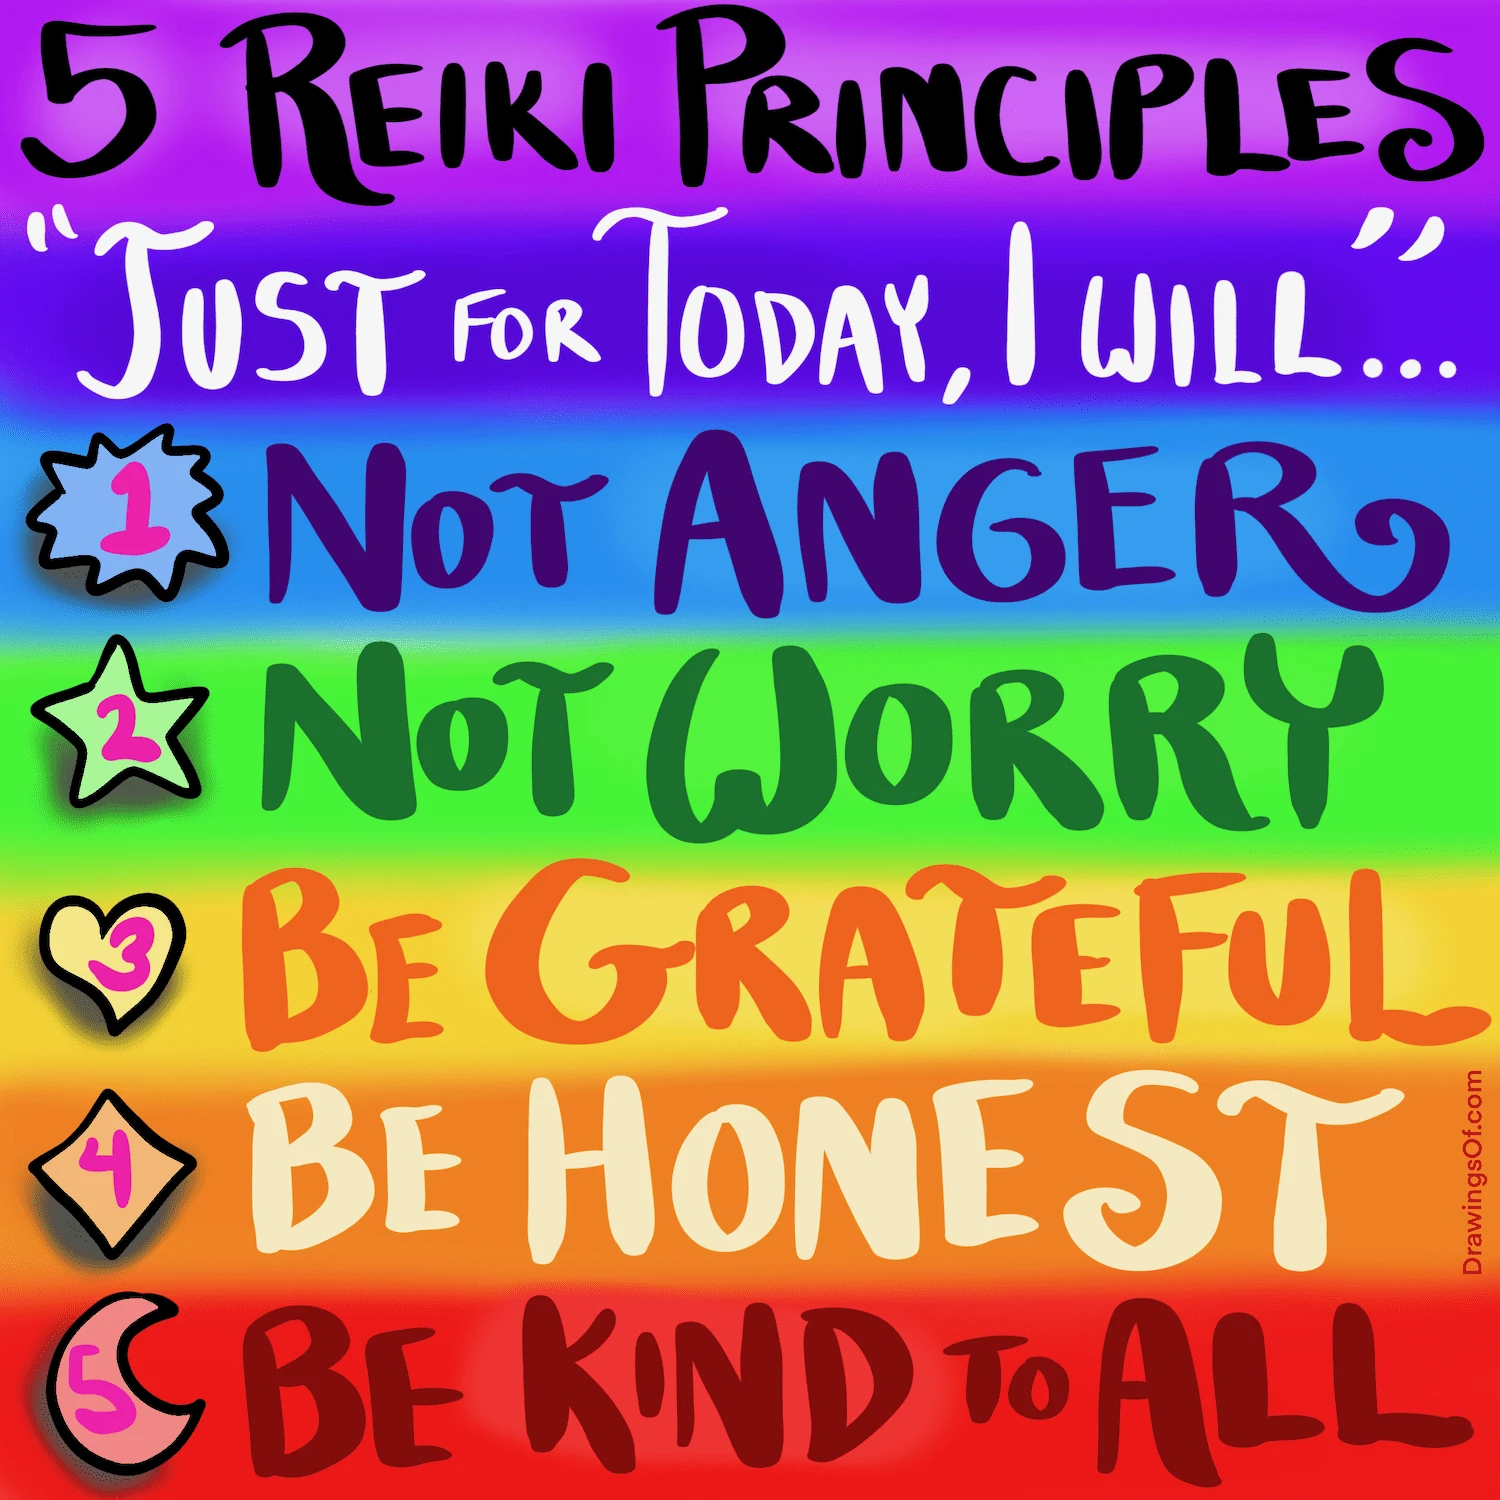 What Are The Primary Principles And Philosophies That Distinguish Reiki And Chakra Healing?